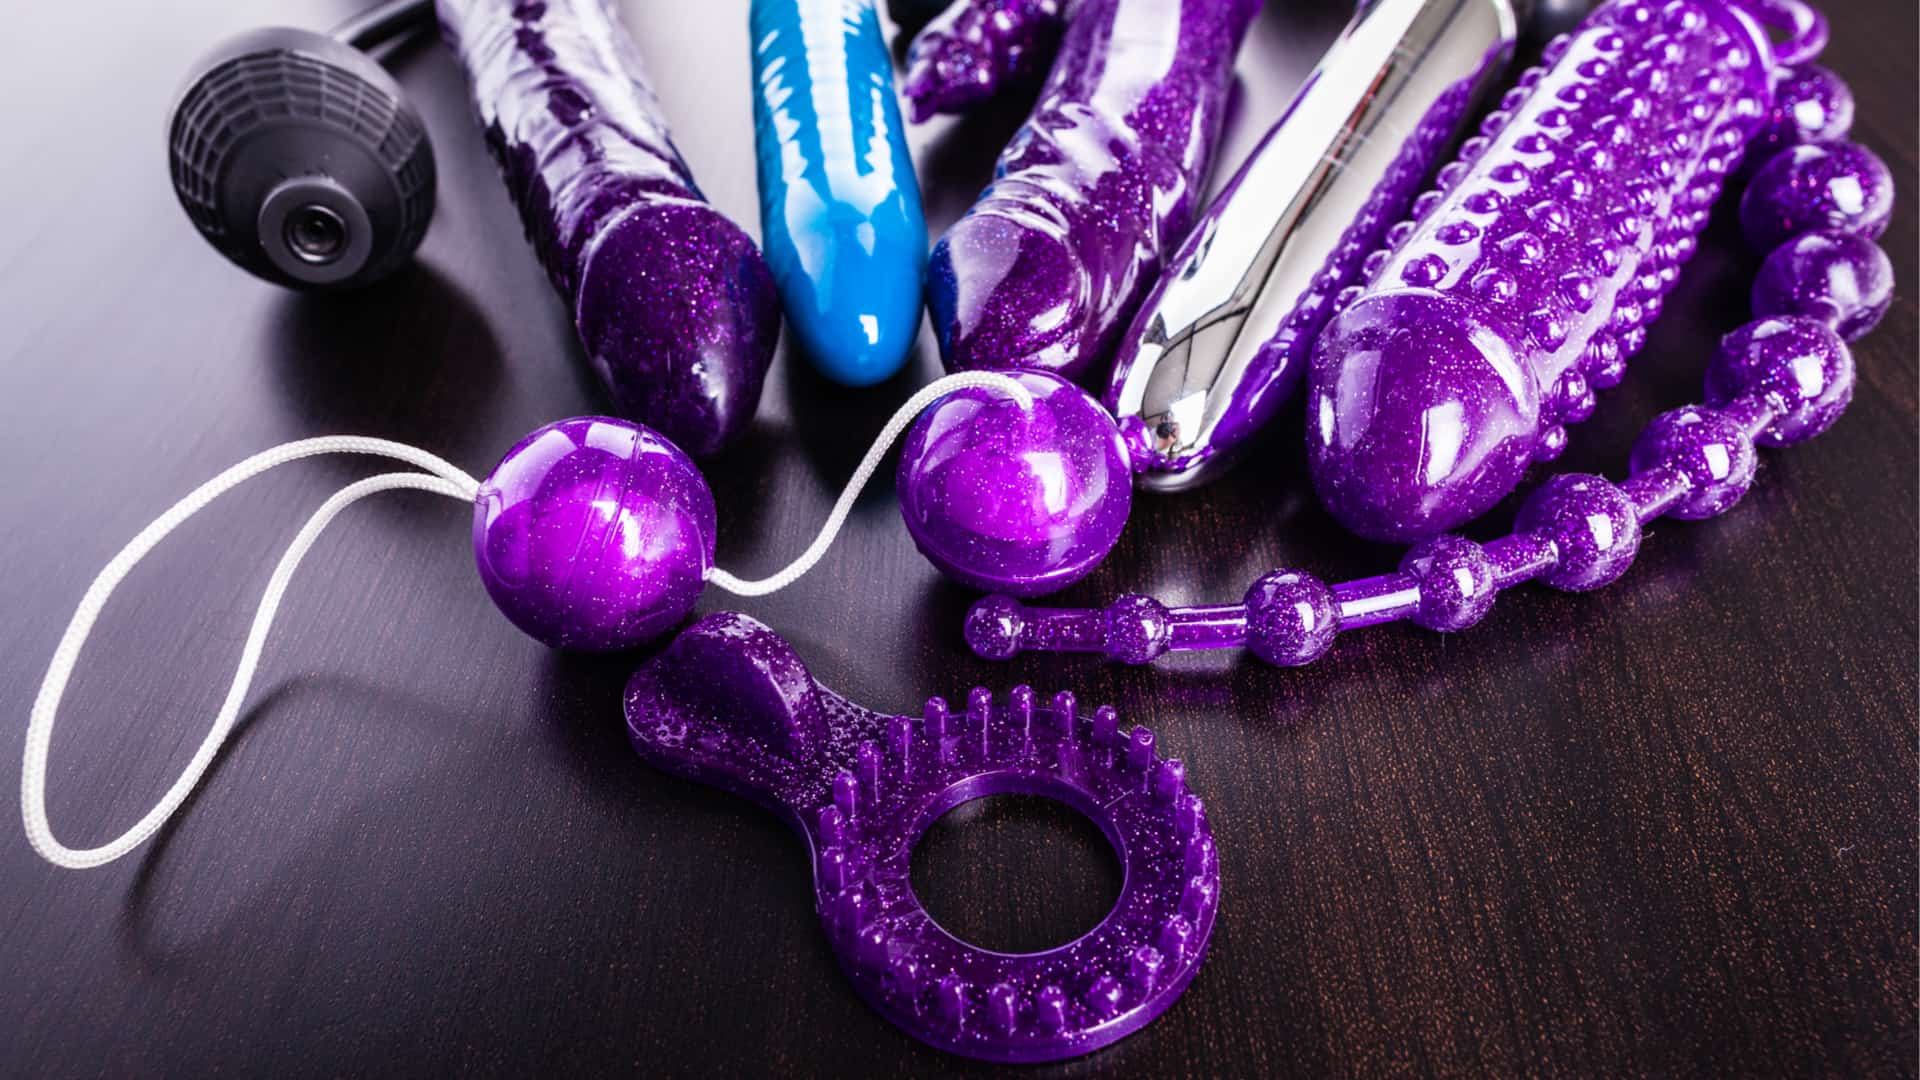 a collection of different types of sextoys, including dildo, vibrators and butt plugs over a dark wooden surface